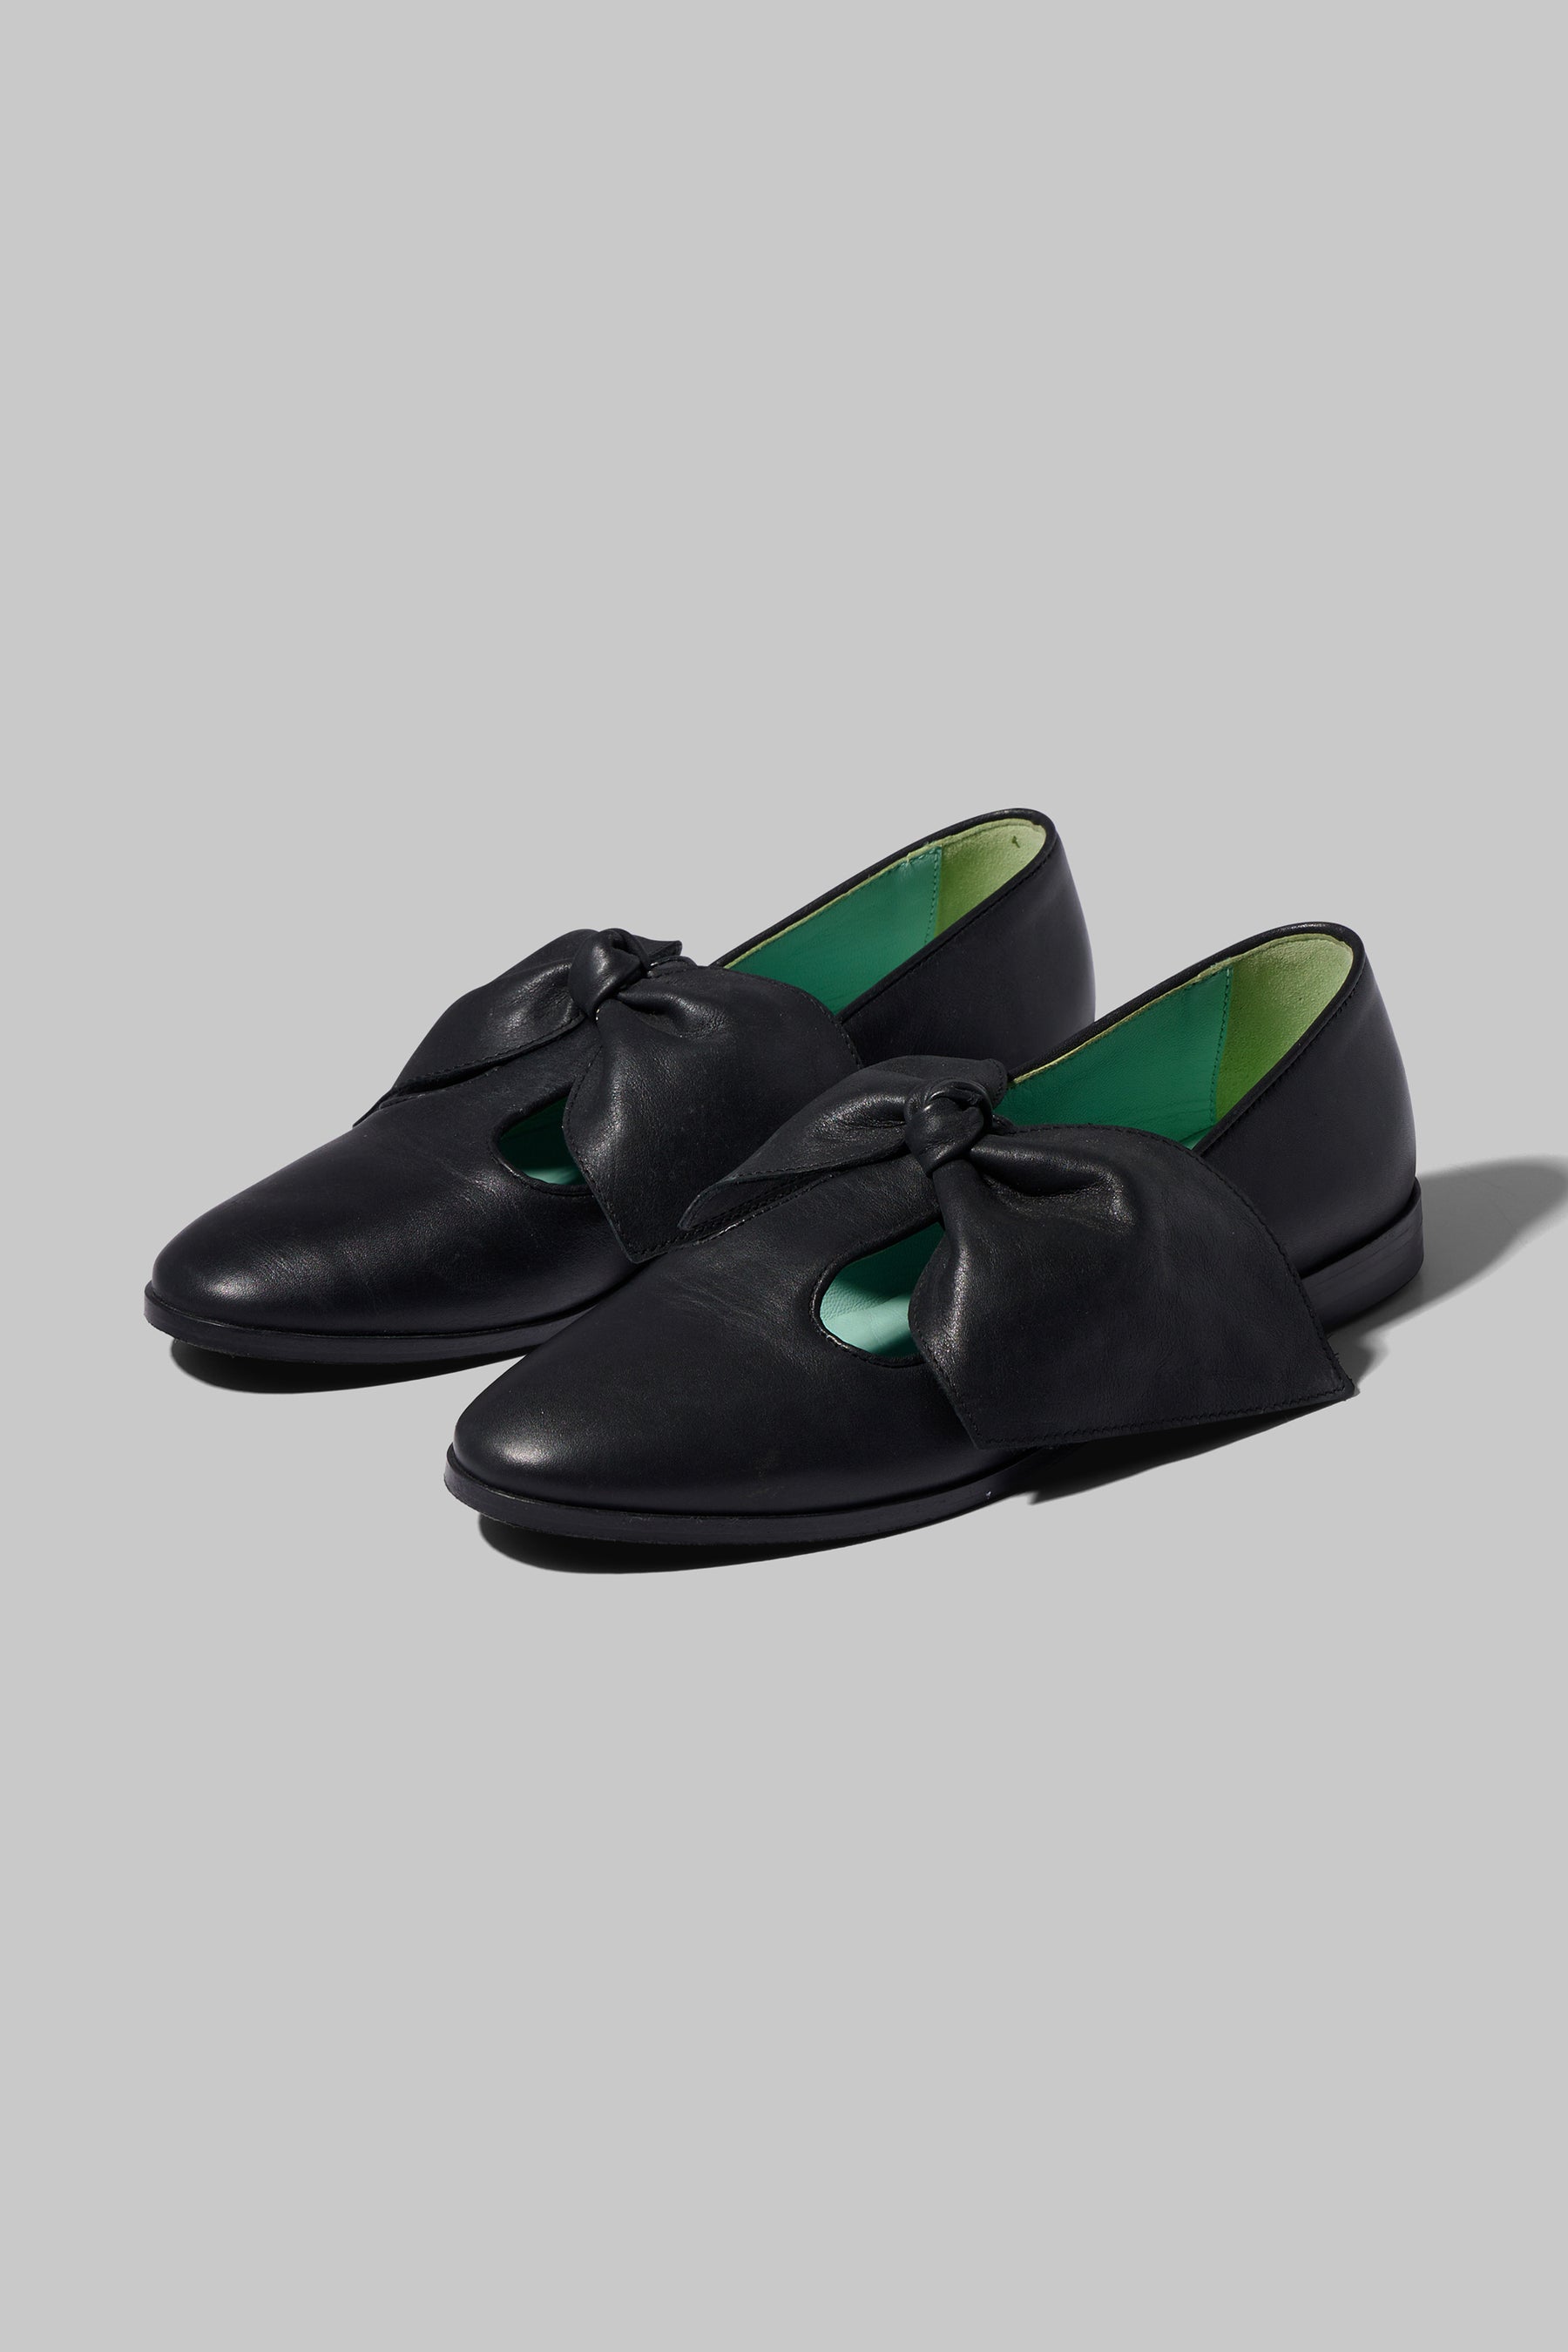 BB ballerina shoes in black leather